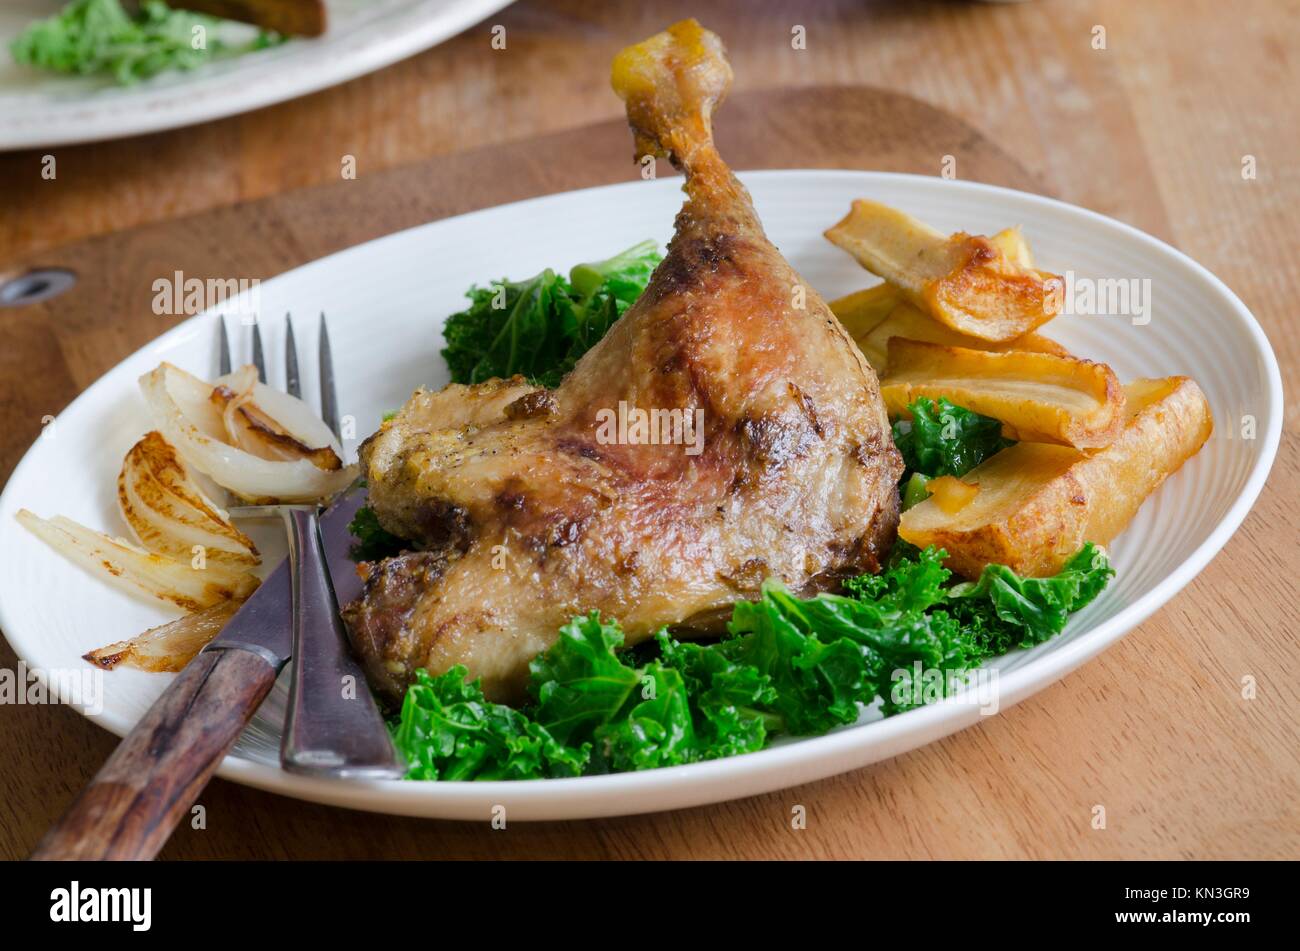 Roast duck legs with steamed kale and roast parsnips. Stock Photo